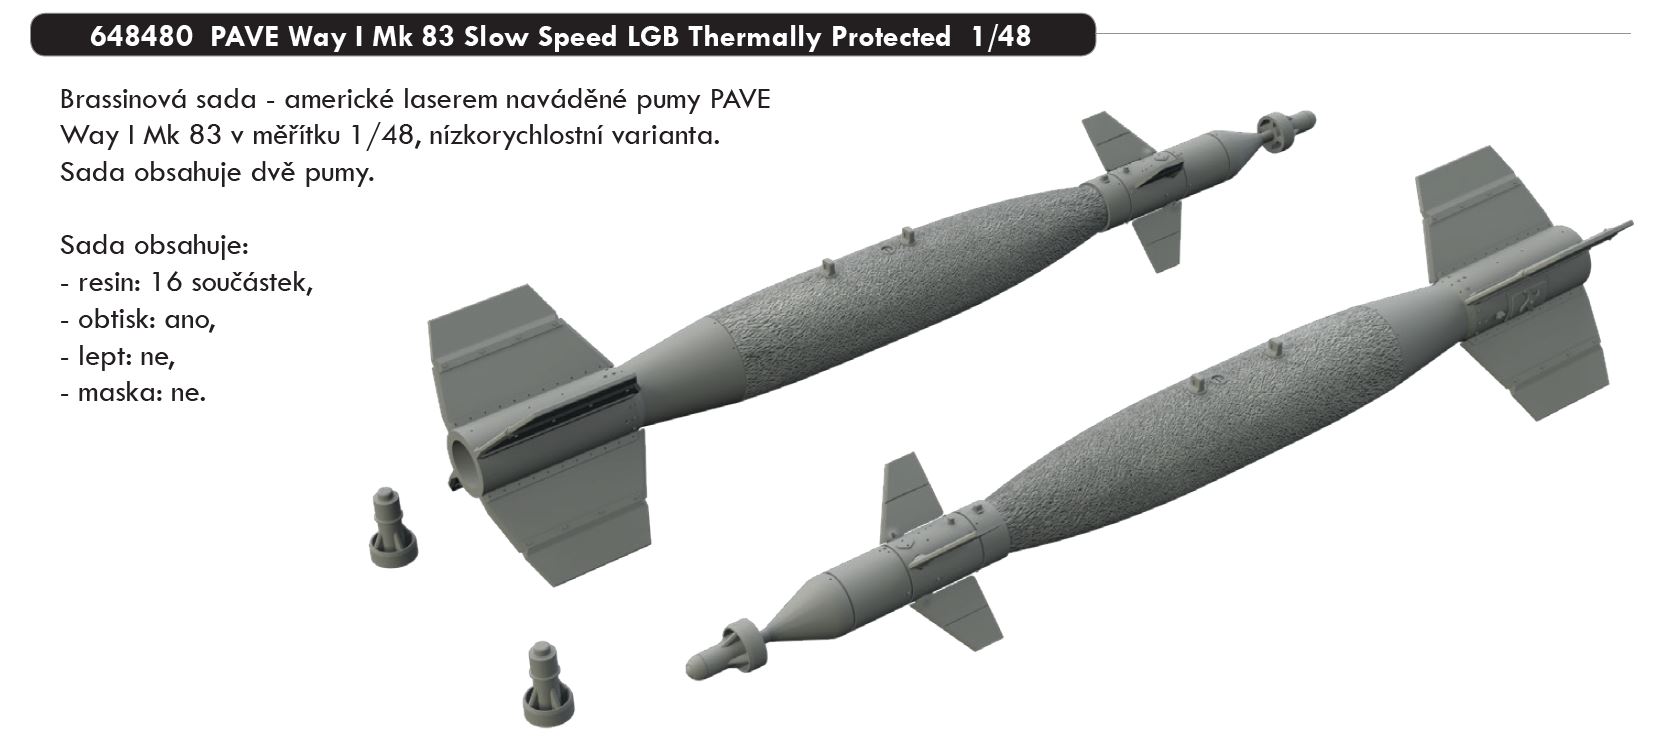 Fotografie 1/48 PAVE Way I Mk 83 Slow Speed LGB Thermally Protected